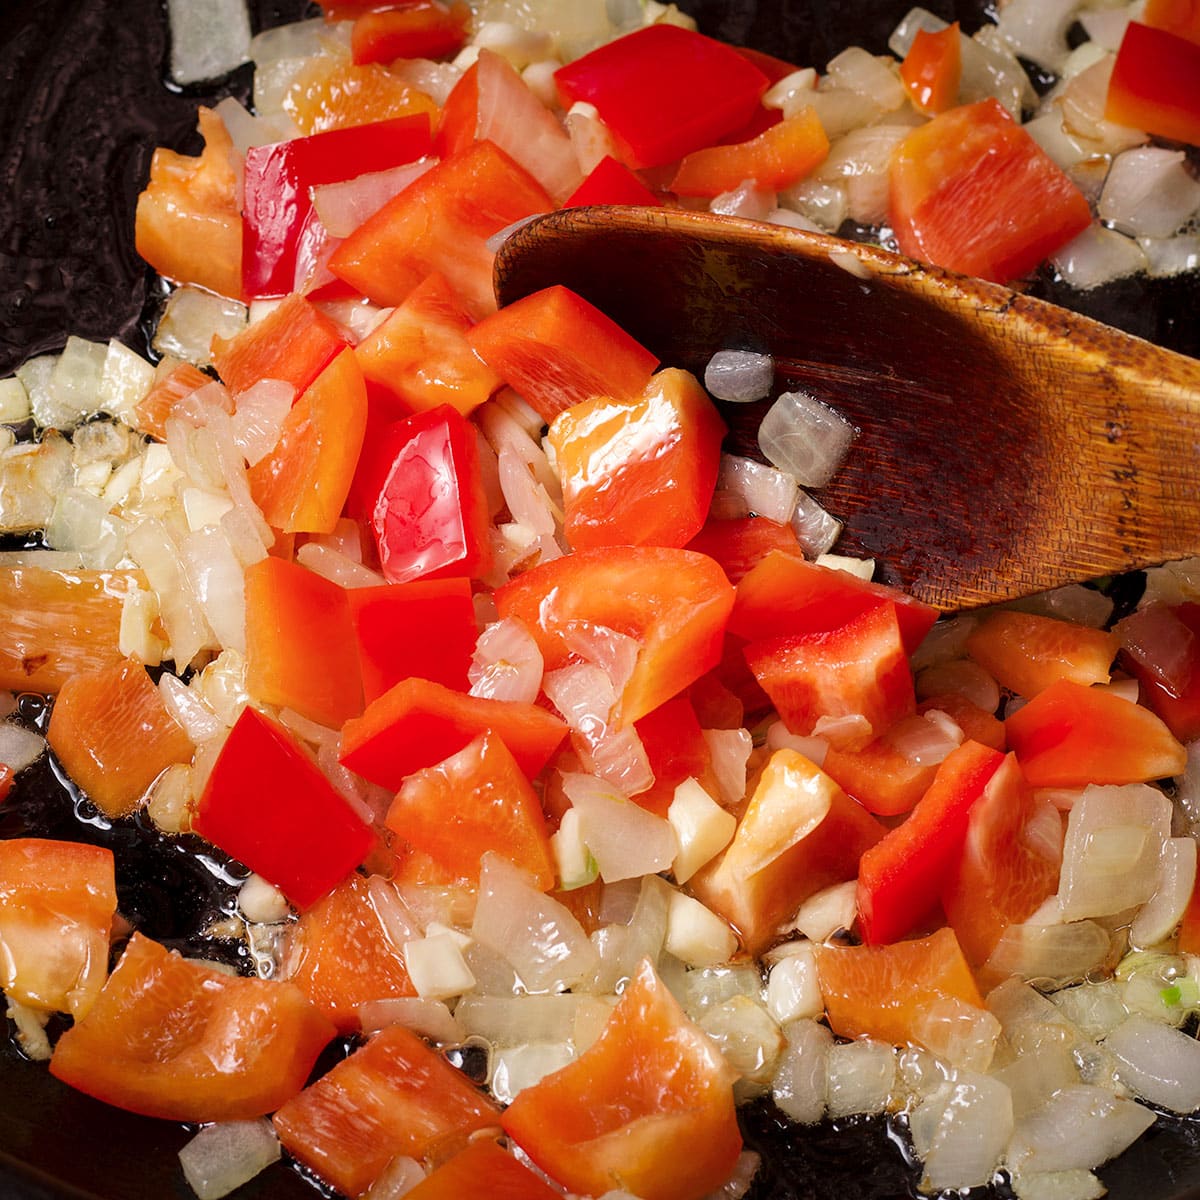 Add chopped red bell pepper and garlic to the skillet with the onion.